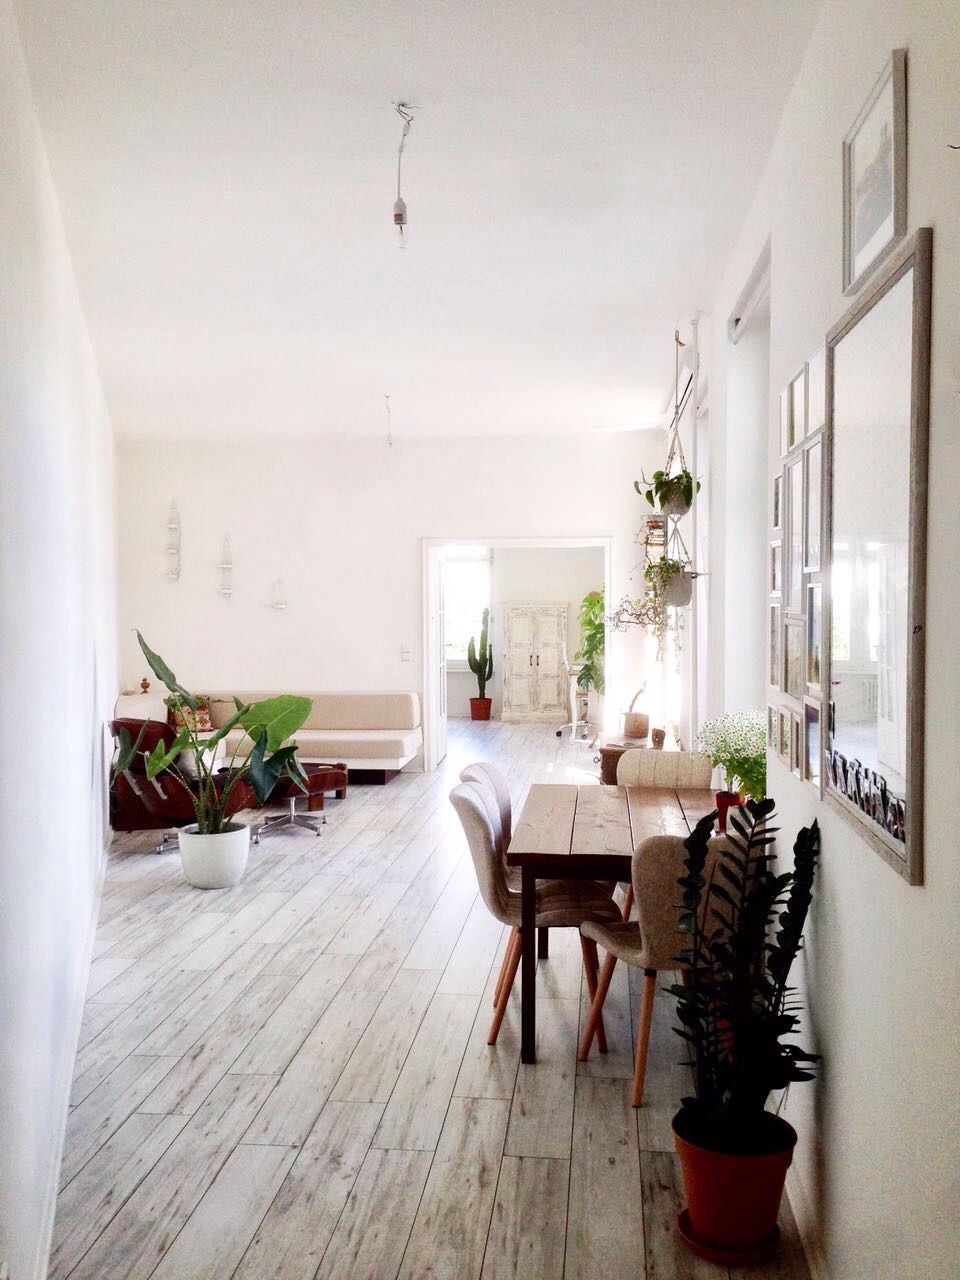 Awesome & Bright 1 BR Appartement in Berlin +AC (Klima) +Parking +Home Gym +Maid Service!